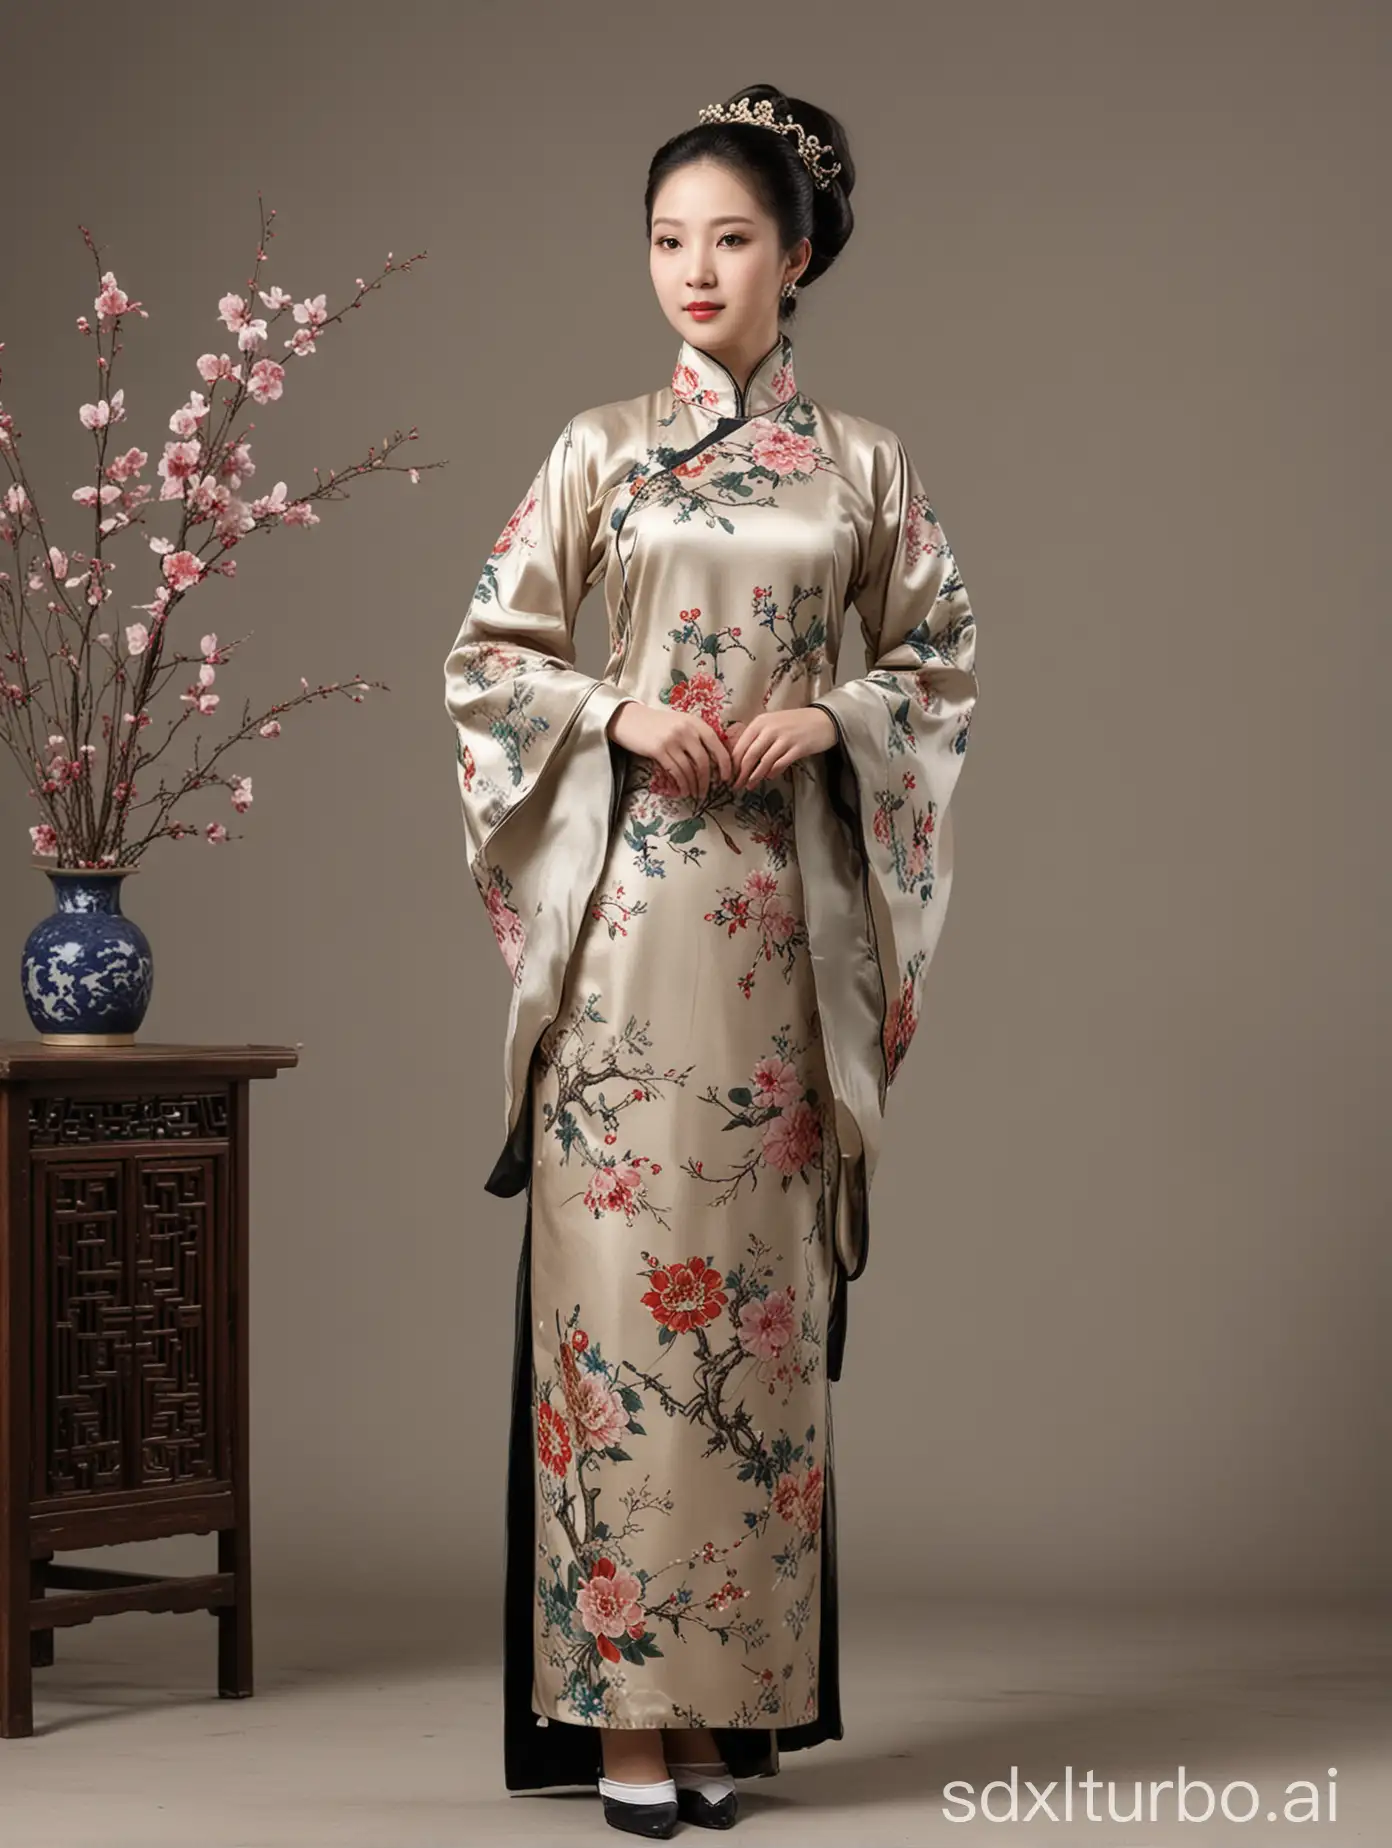 Elegant-Gathering-in-Traditional-Chinese-Clothing-Mastering-the-Art-of-Calligraphy